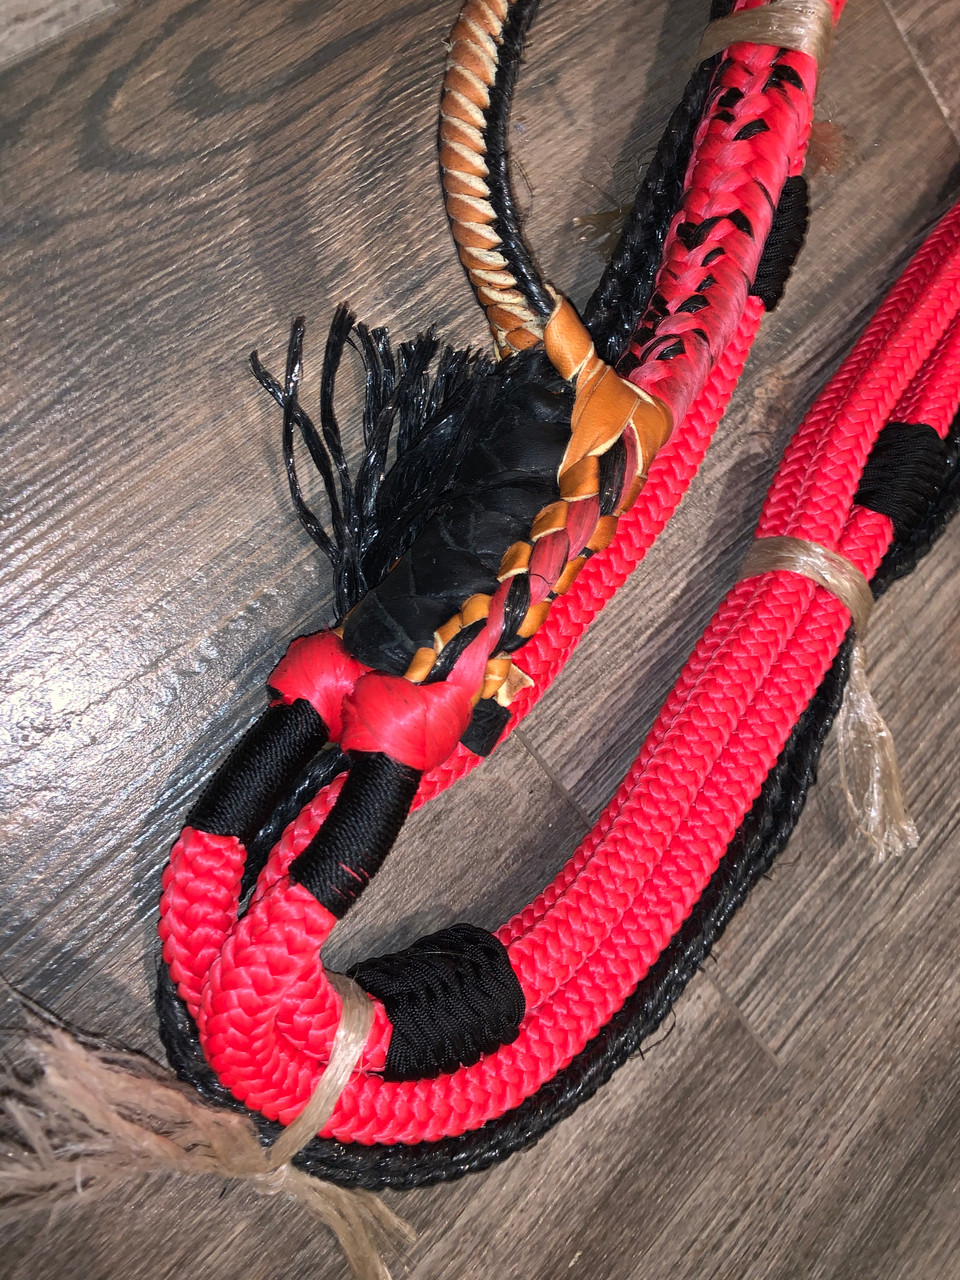 Insidious Red Rope- Pro 9/7 RH EPT Signature Bull Ropes 7/8 x 7/8- Rodeo  Rider -16